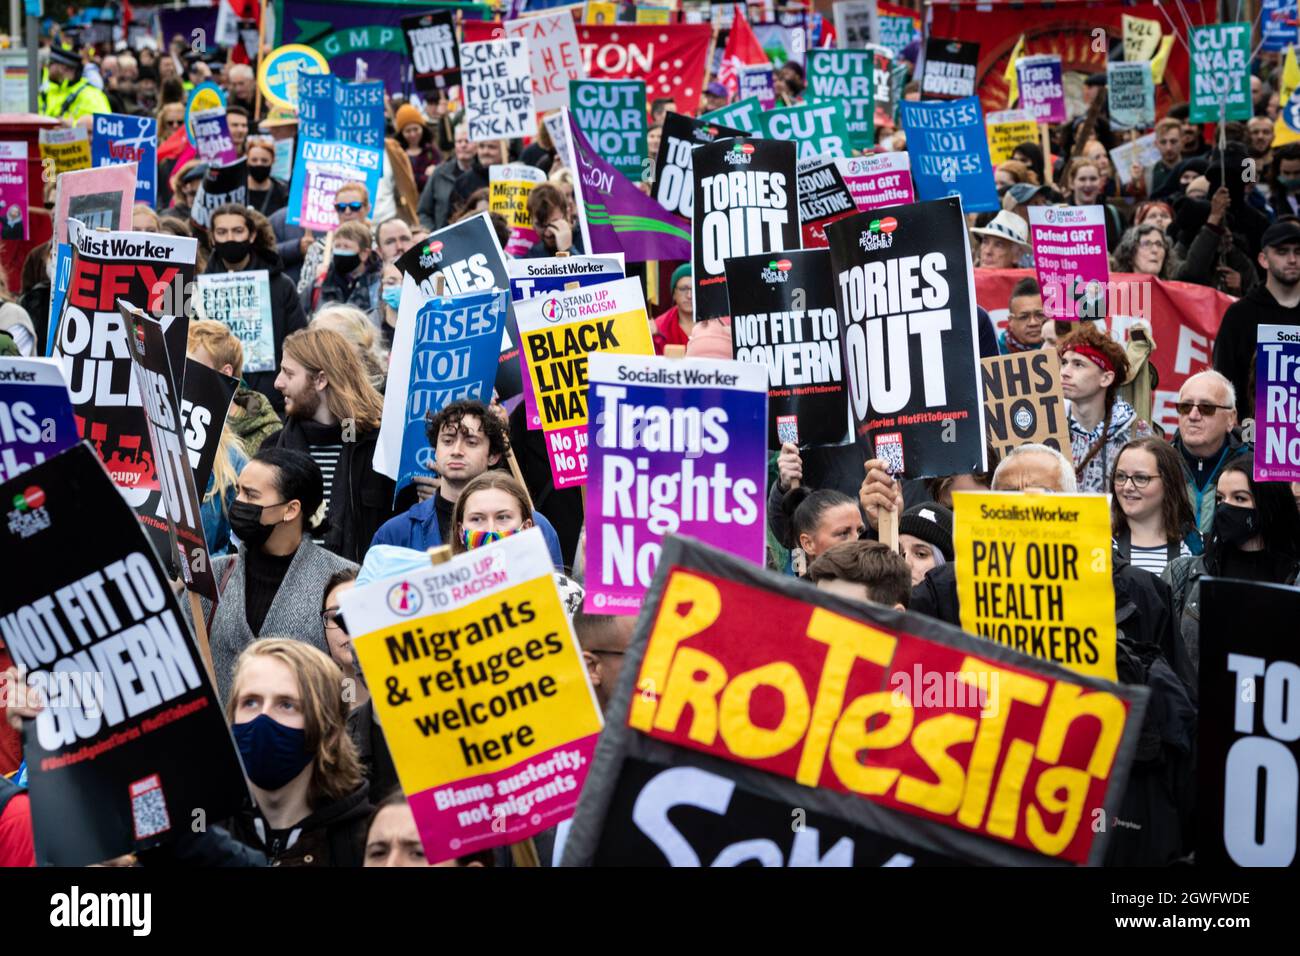 Thousands of demonstrators take to the streets to protest against the Tory Party. Social movements and unions unite and march past the Conservative Party Conference demanding fairer policies for the working class. Credit: Andy Barton/Alamy Live News Stock Photo